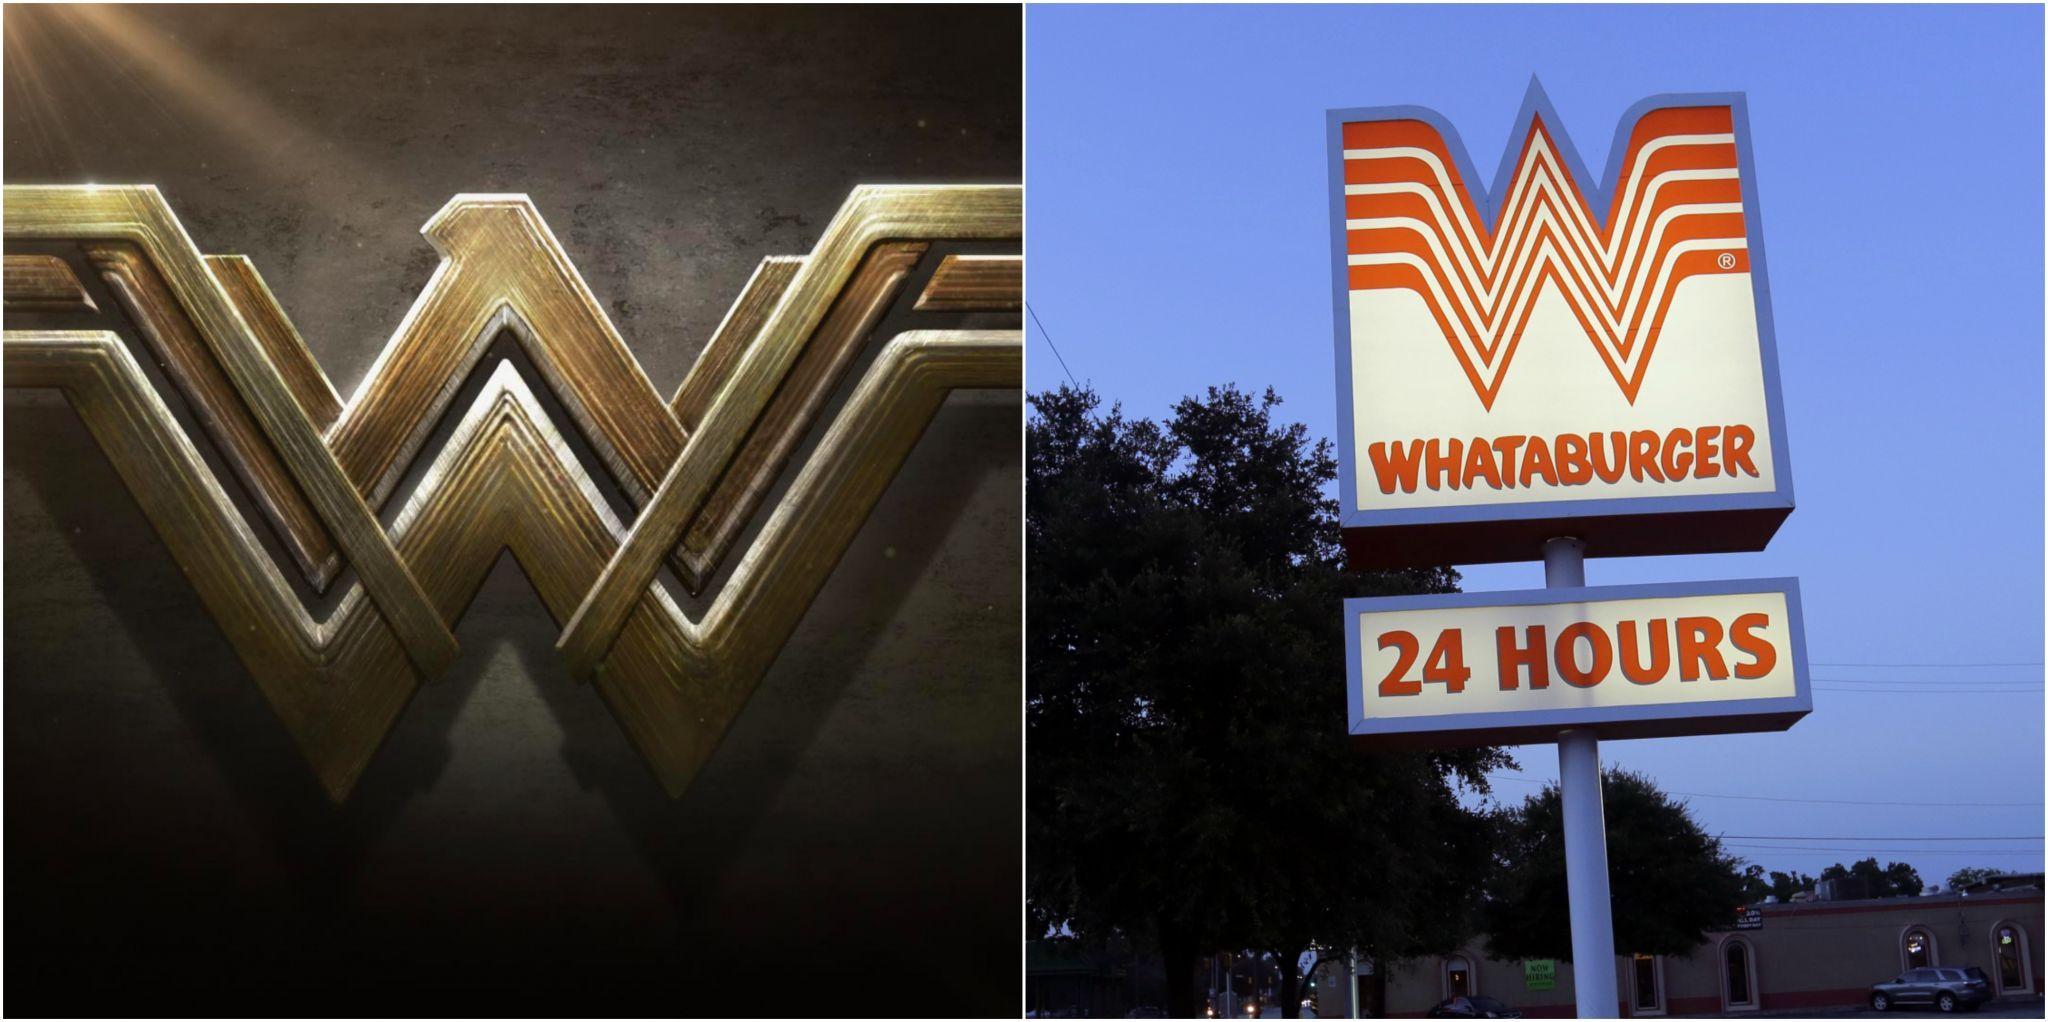 Whataburger Logo - Whataburger, DC Comics are currently discussing Wonder Woman's new ...